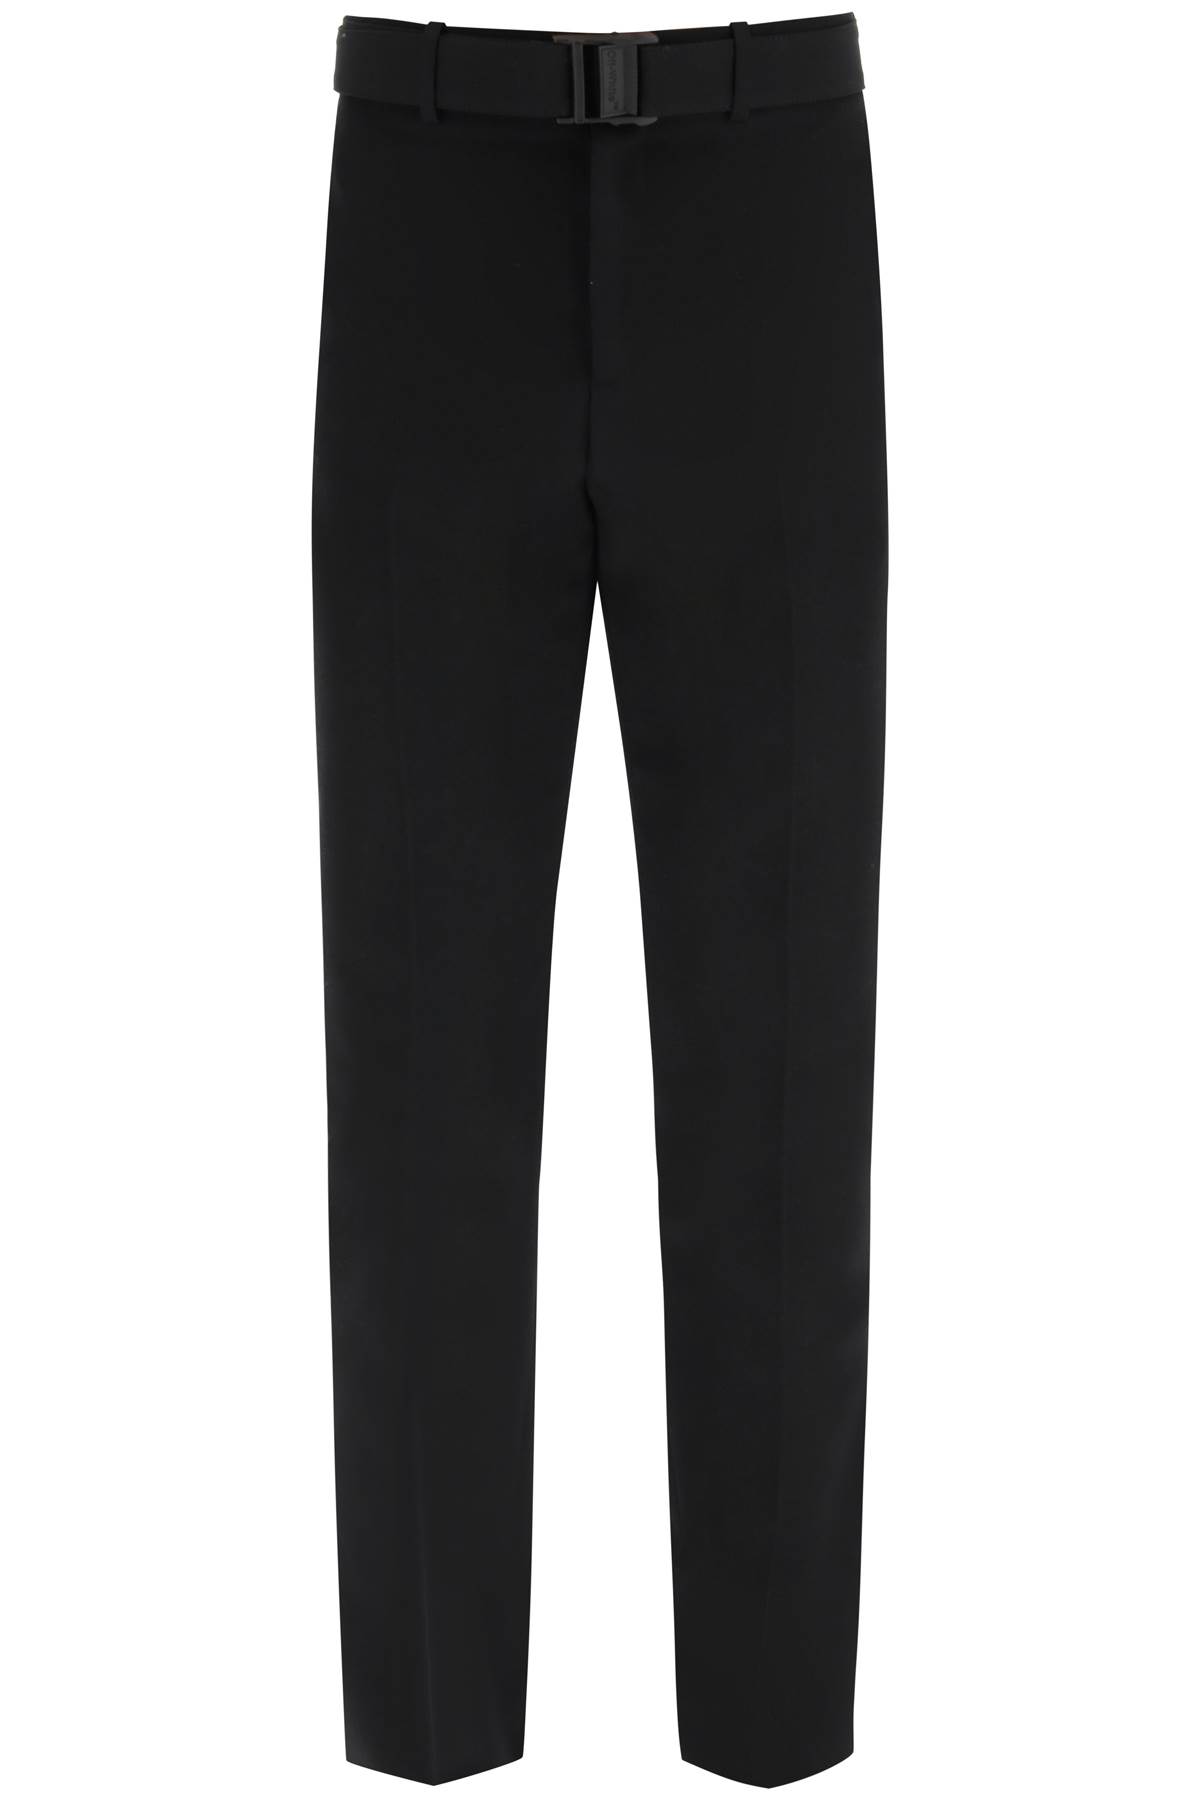 Off-White Dry Wool Trousers With Matching Belt